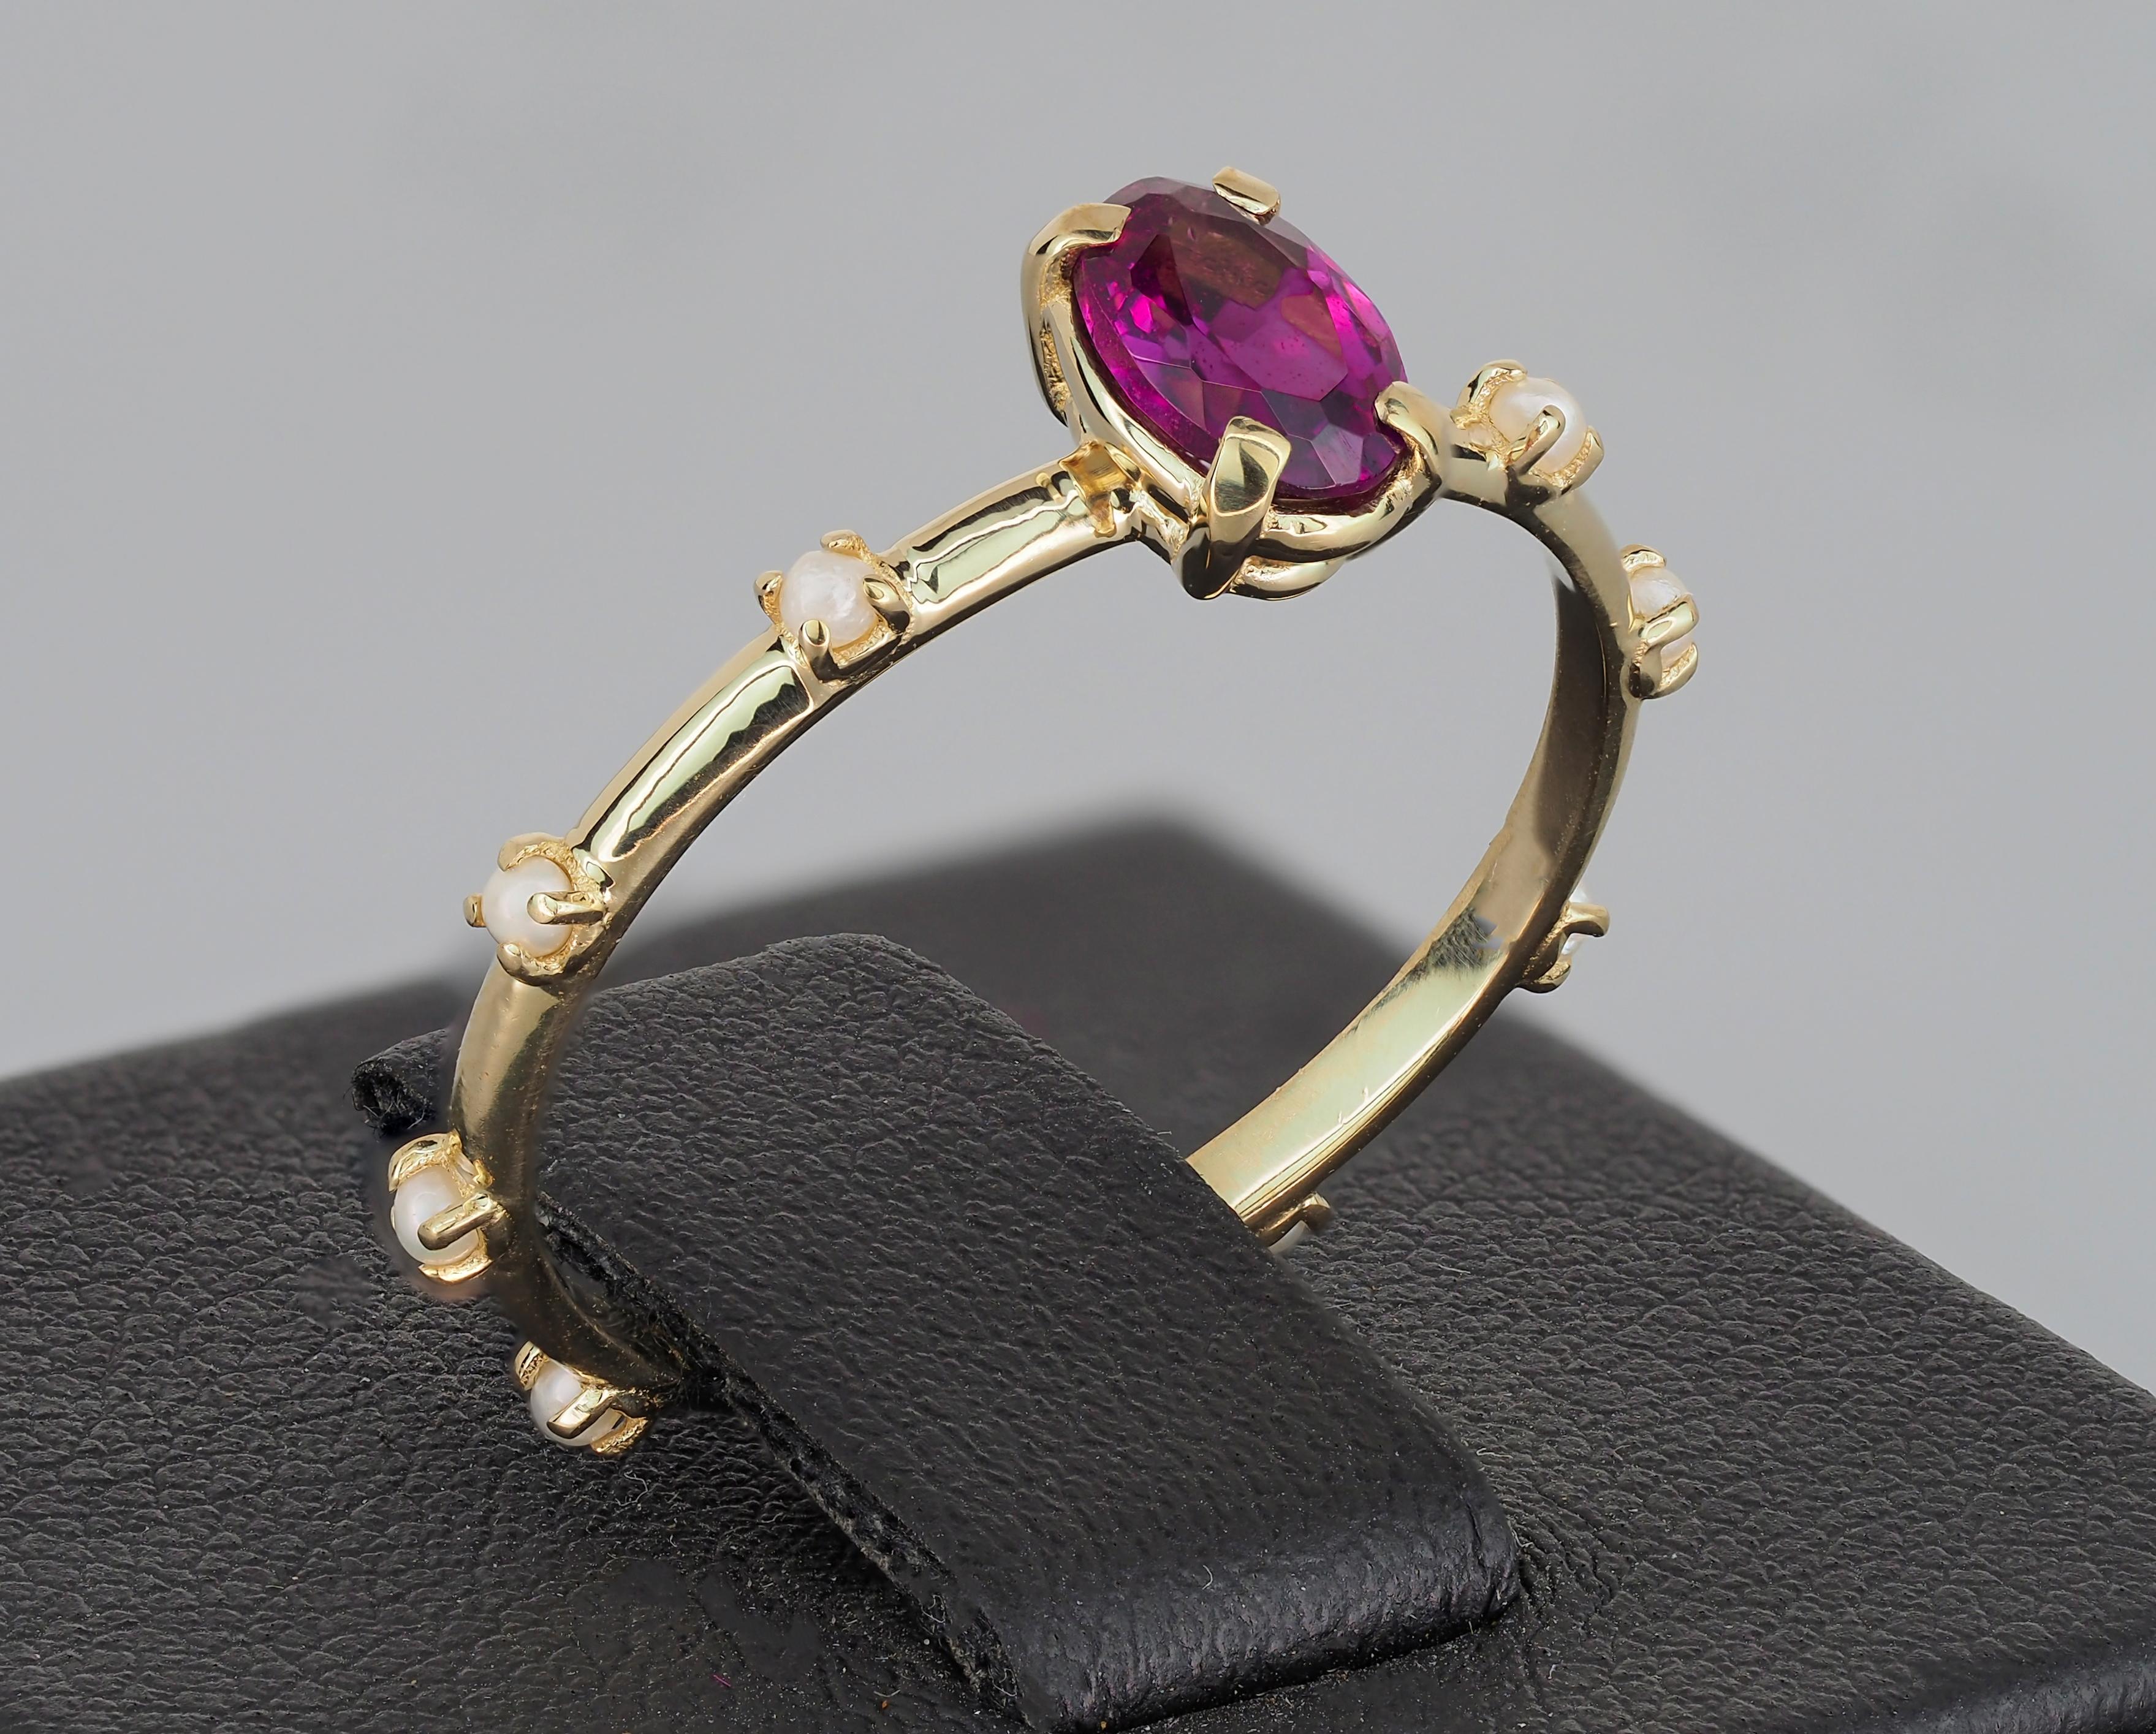 For Sale:  Garnet and pearls 14k gold ring. Eternity ring 2